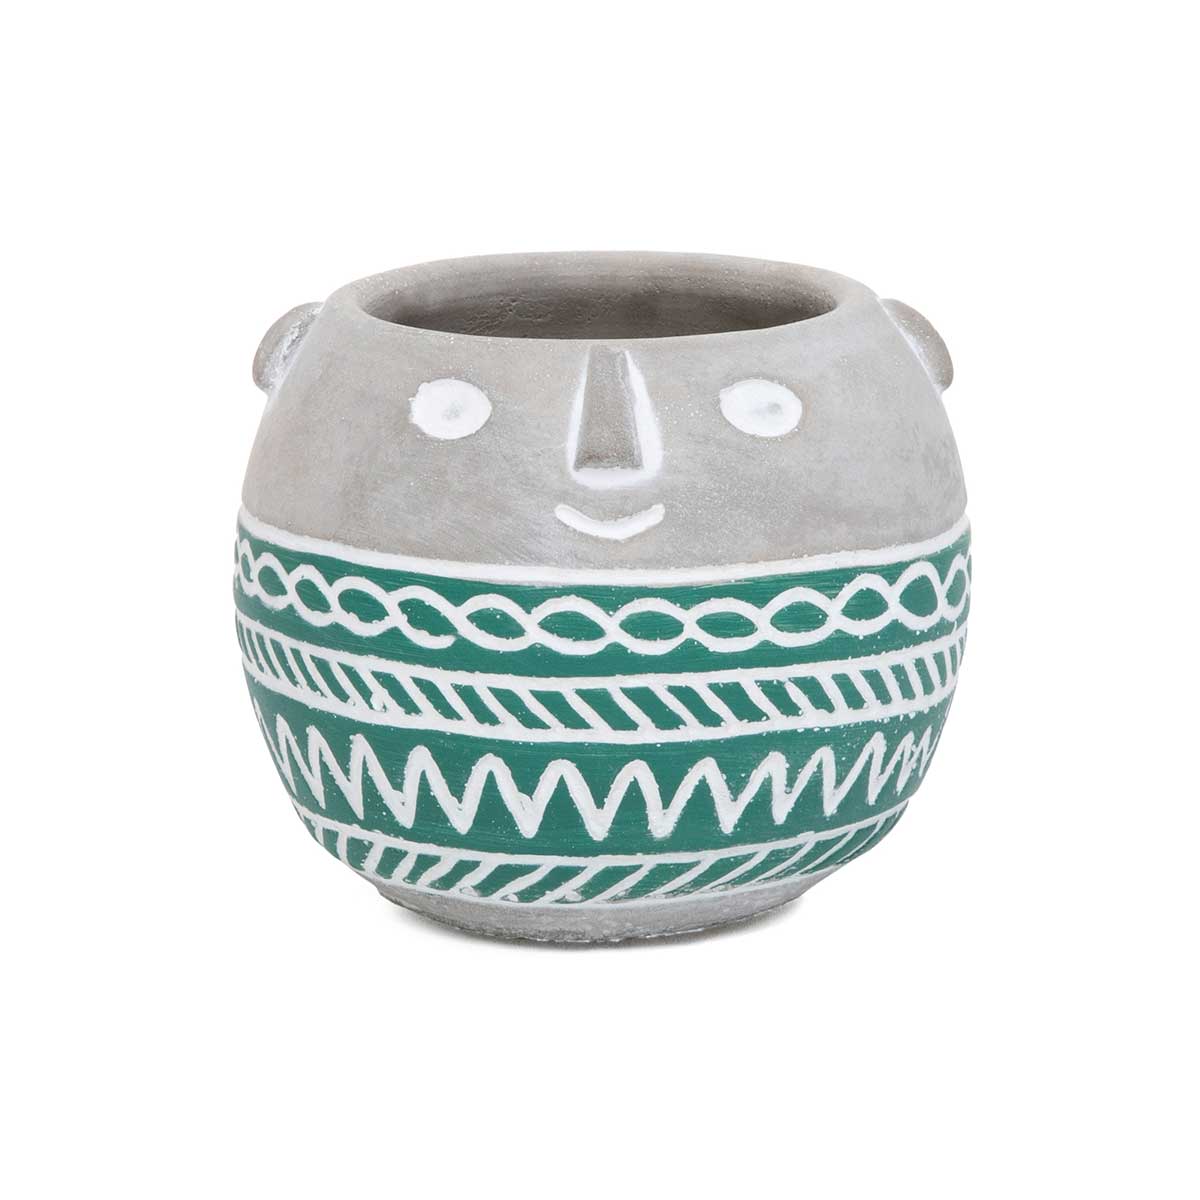 PERUVIAN FACE CONCRETE POT GREEN WITH LINES 4.5"X3.75"